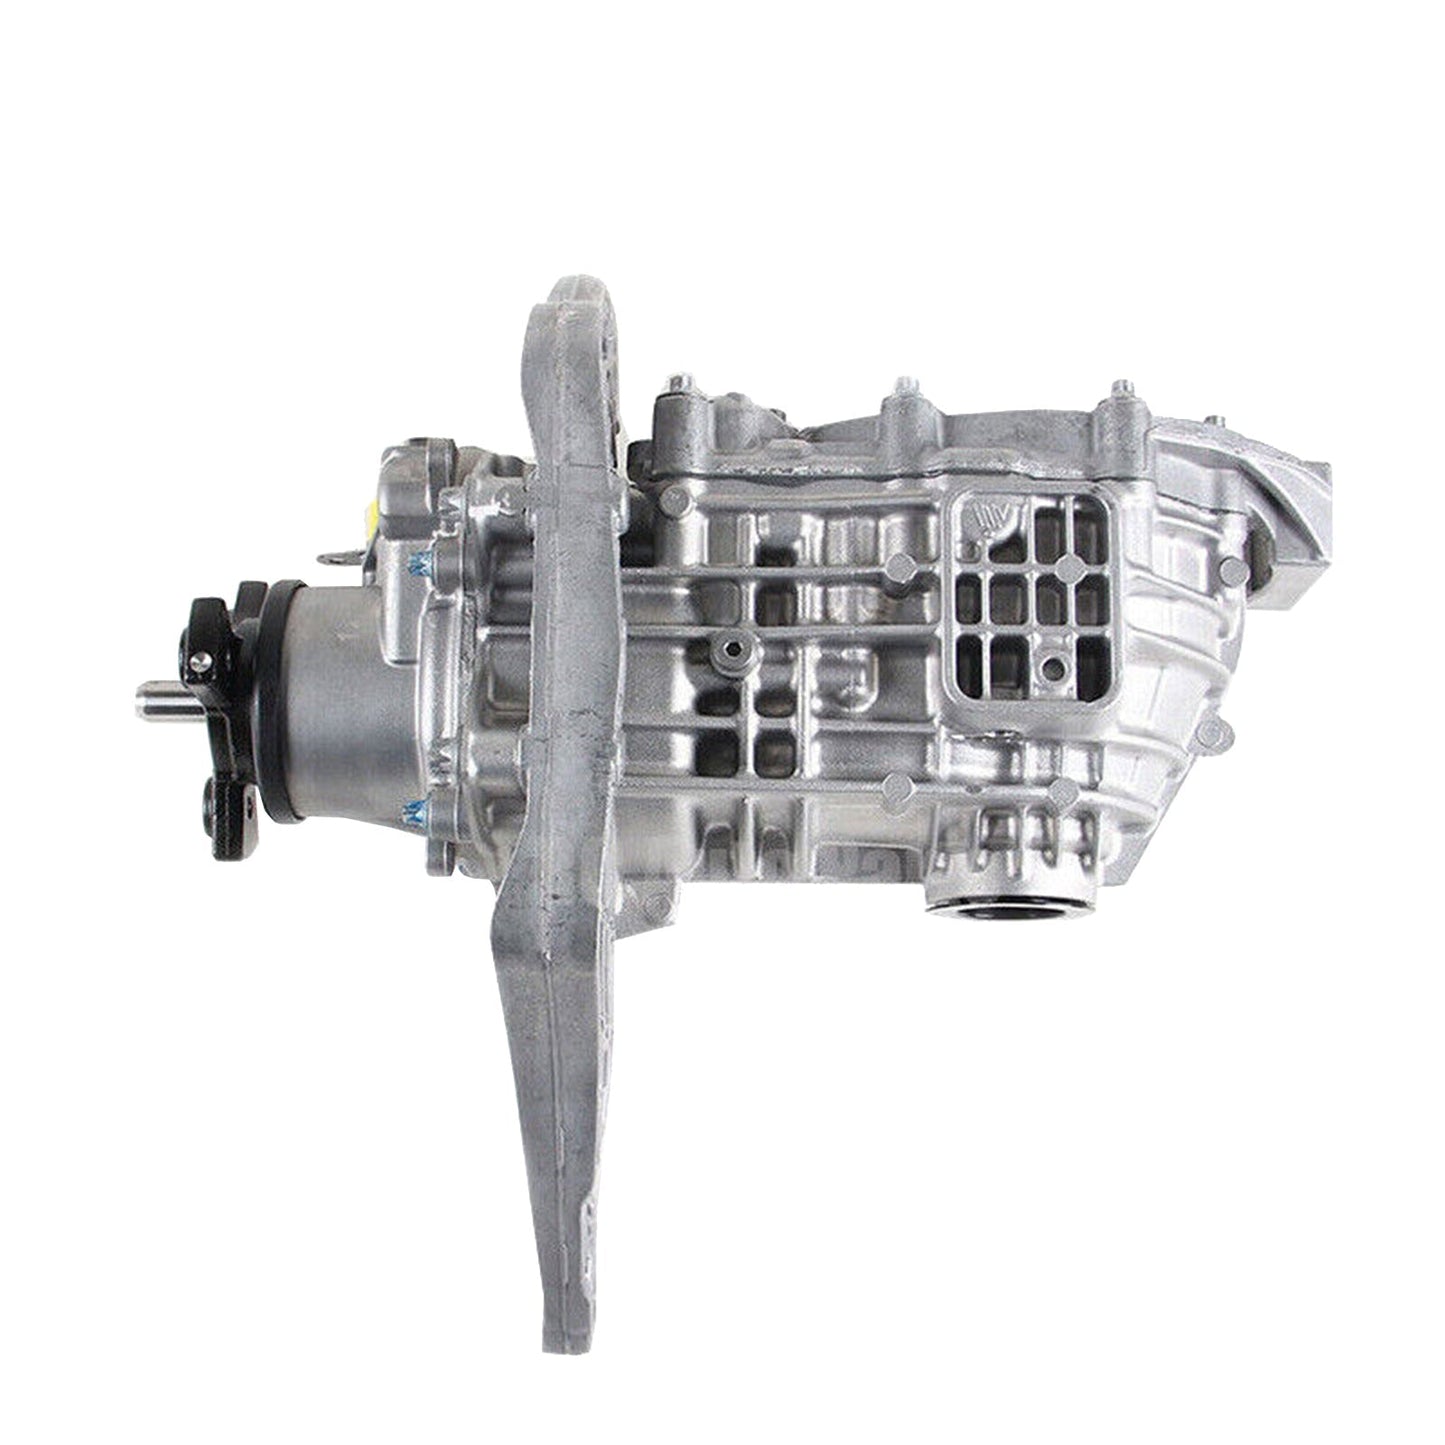 Mercedes Benz W117 CLA 220 CDI 4-MATIC Rear Differential Assembly A2463500802